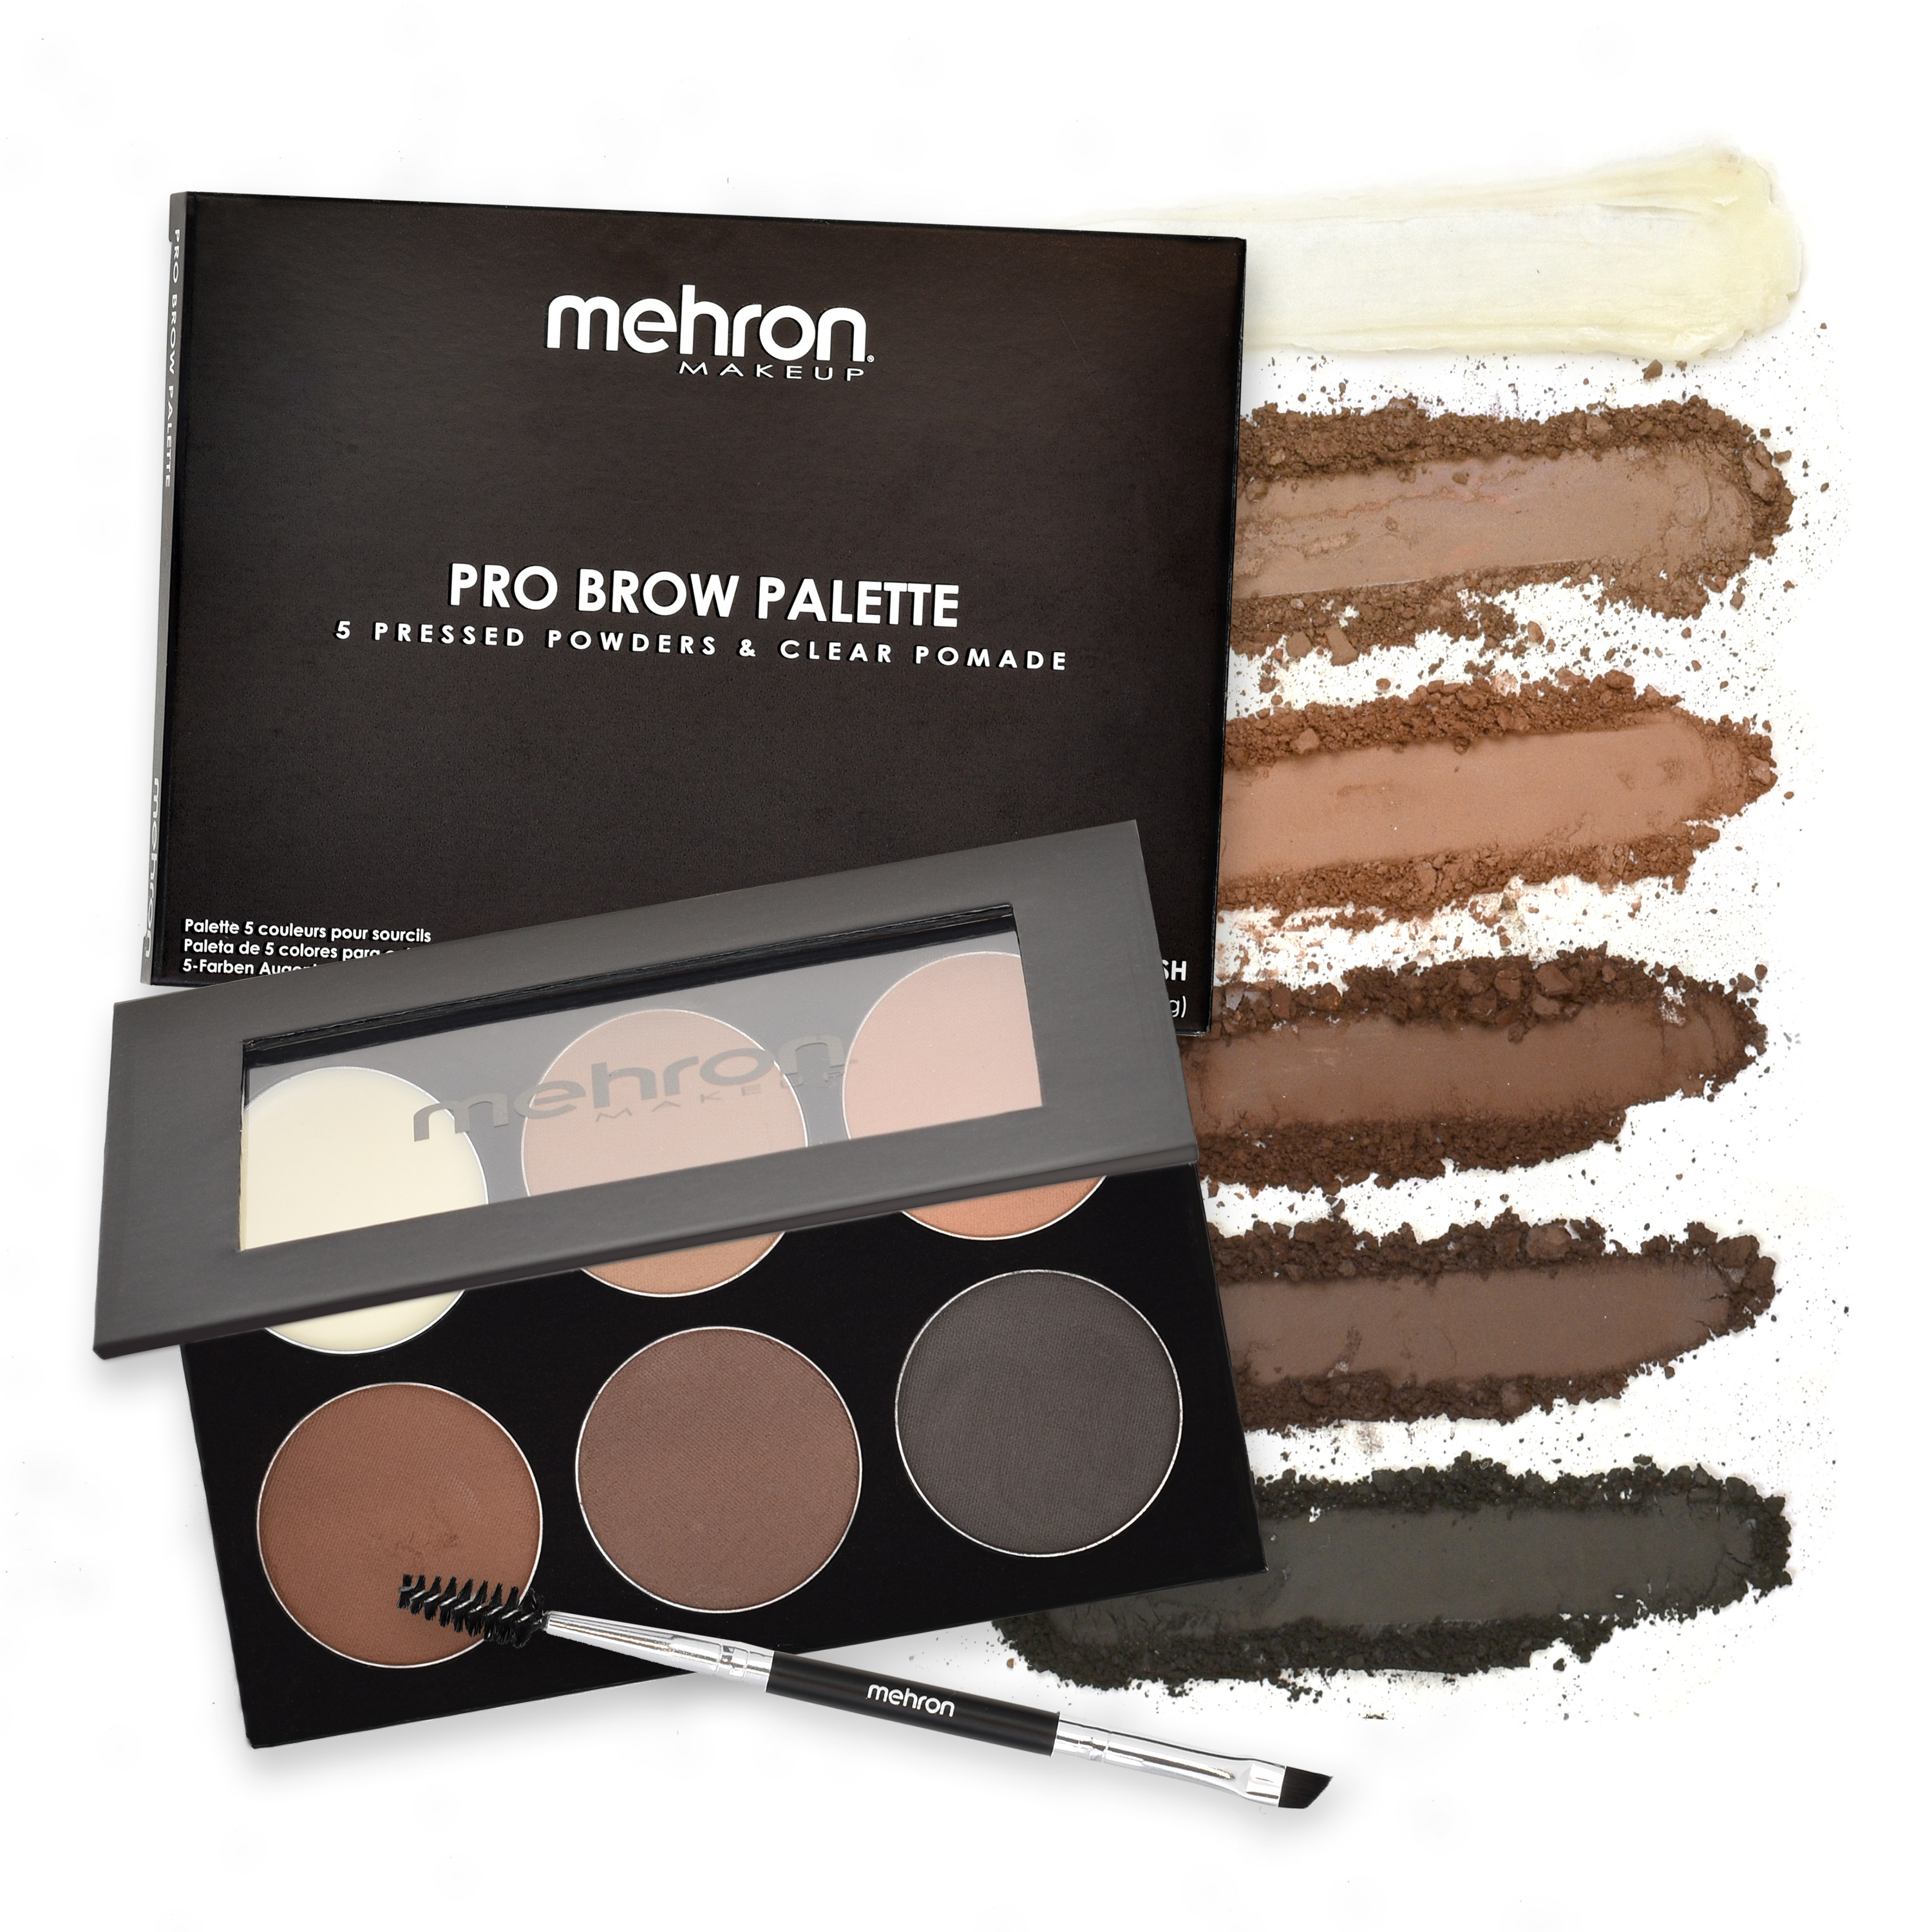 Mehron - PRO BROW Palette 5 Farben + Clear Pomade, 24g